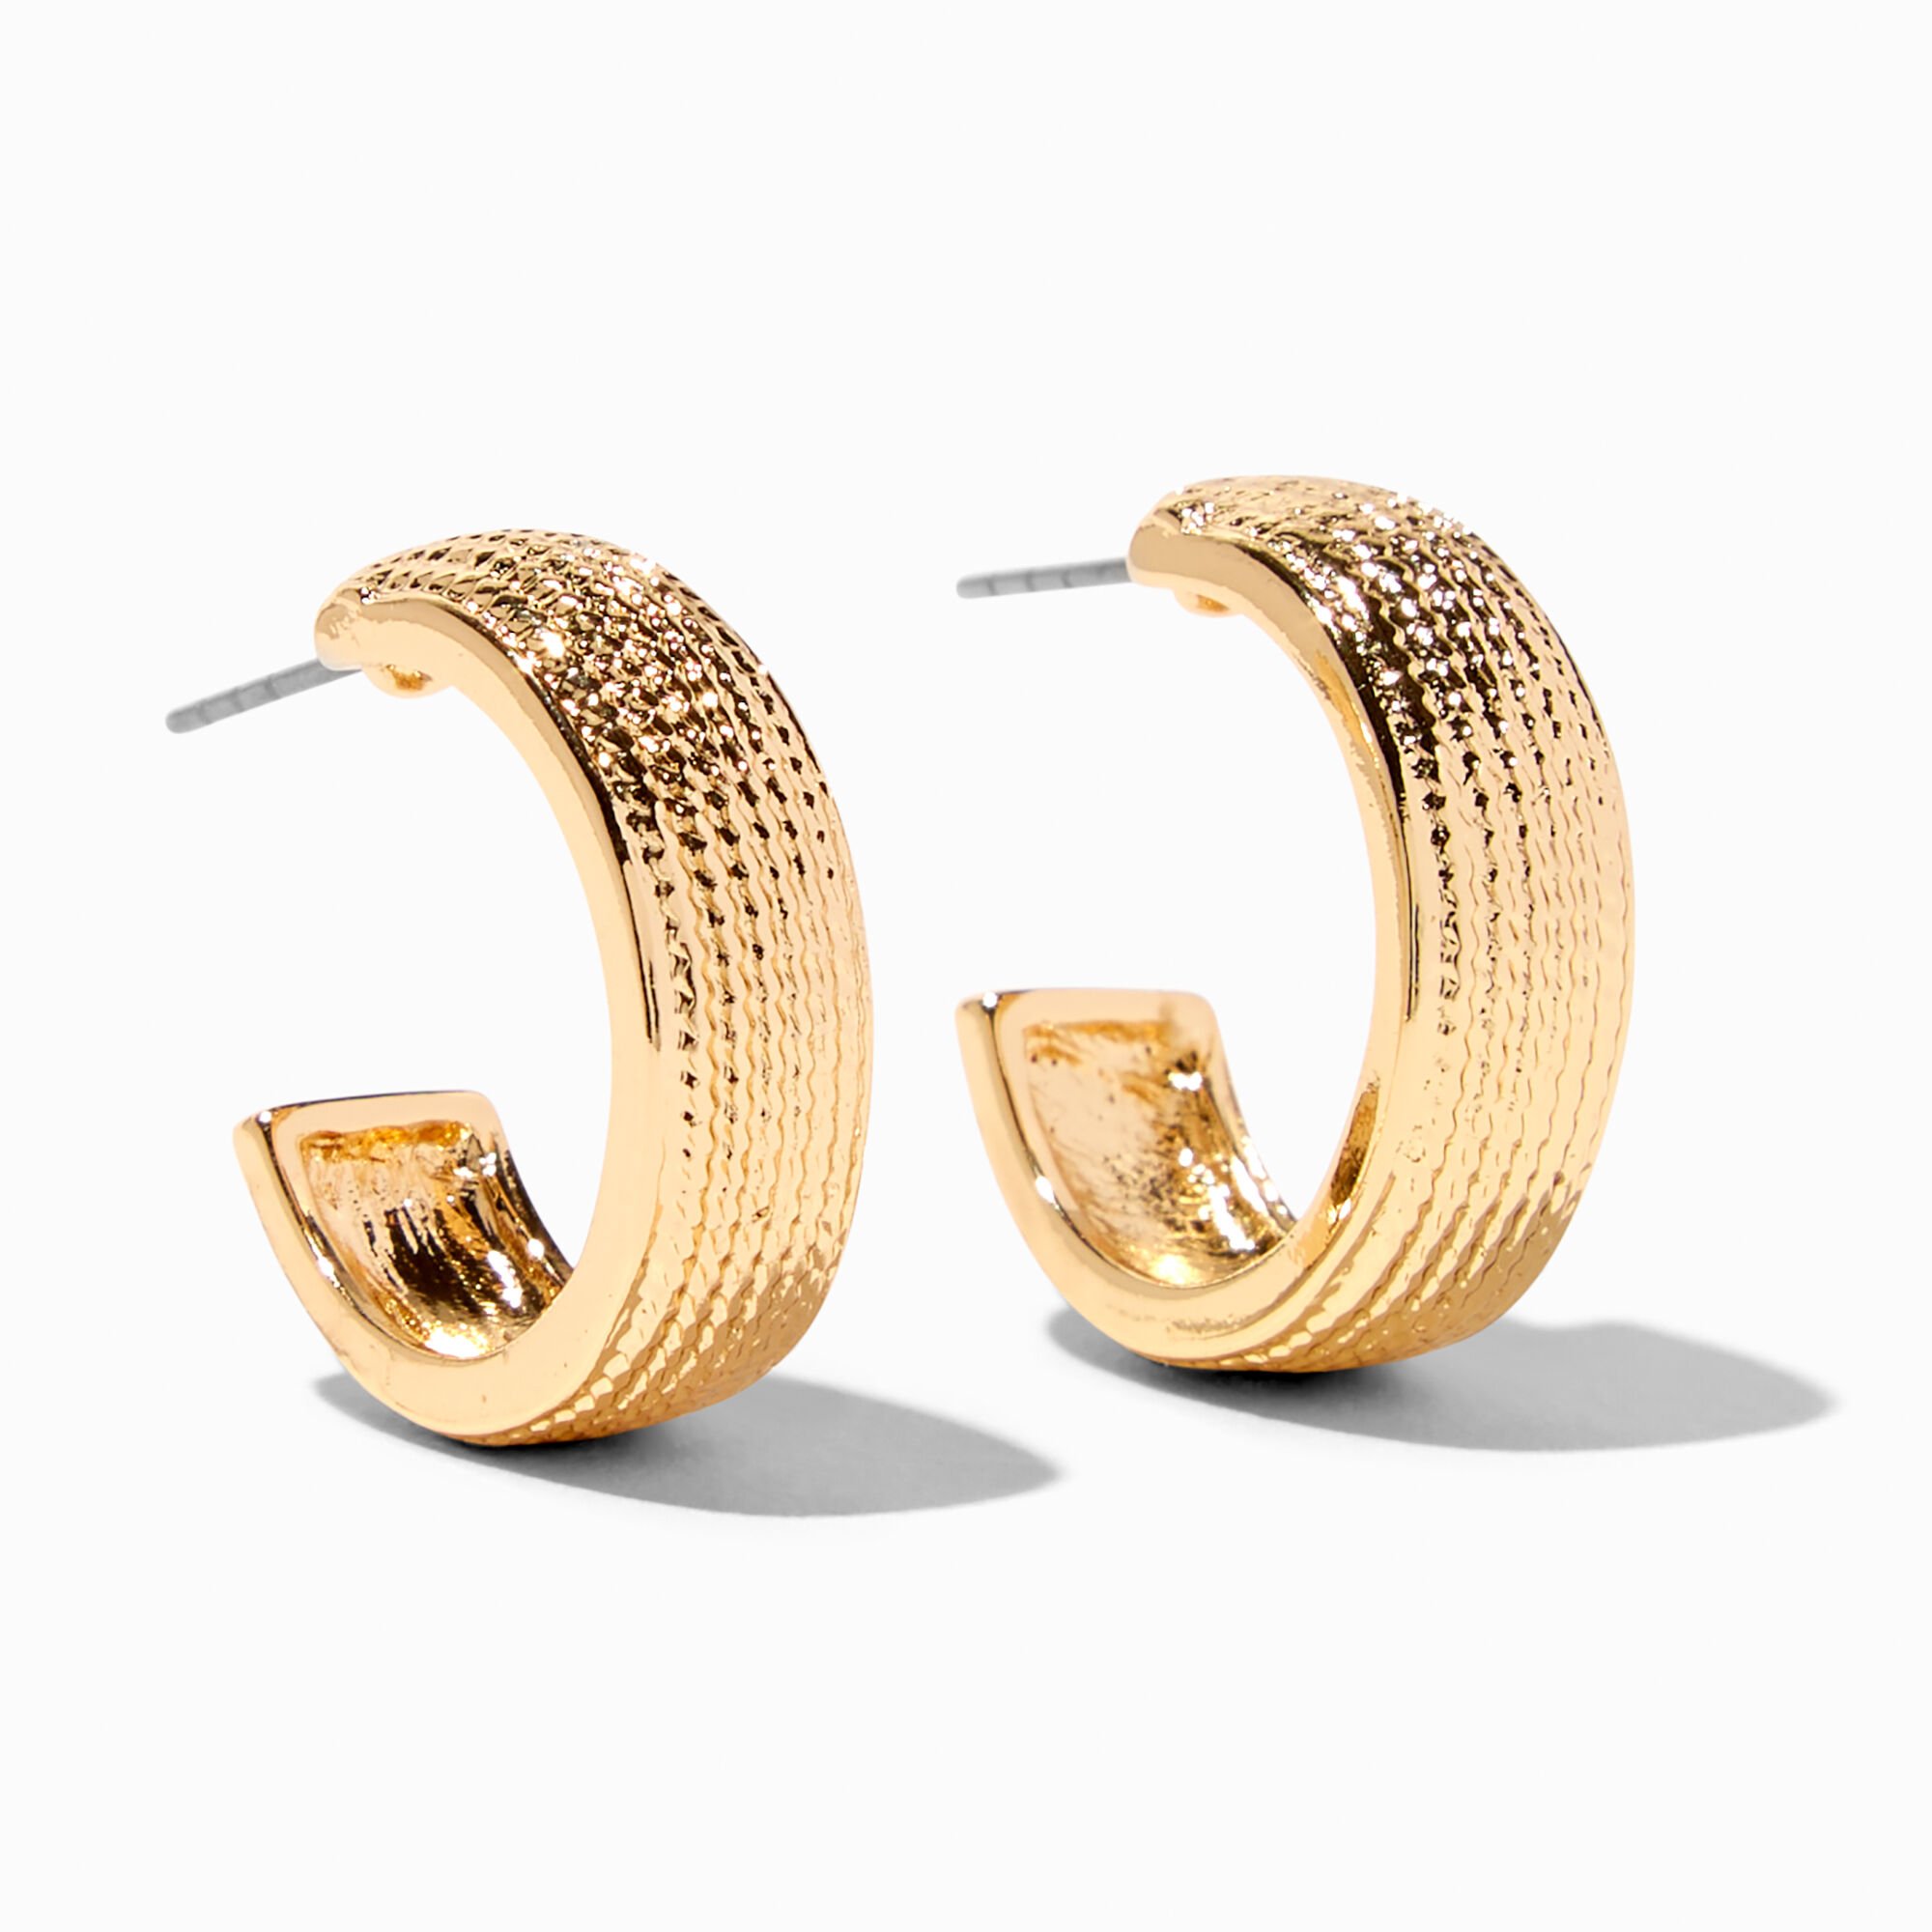 View Claires Tone Tire Print 20MM Hoop Earrings Gold information